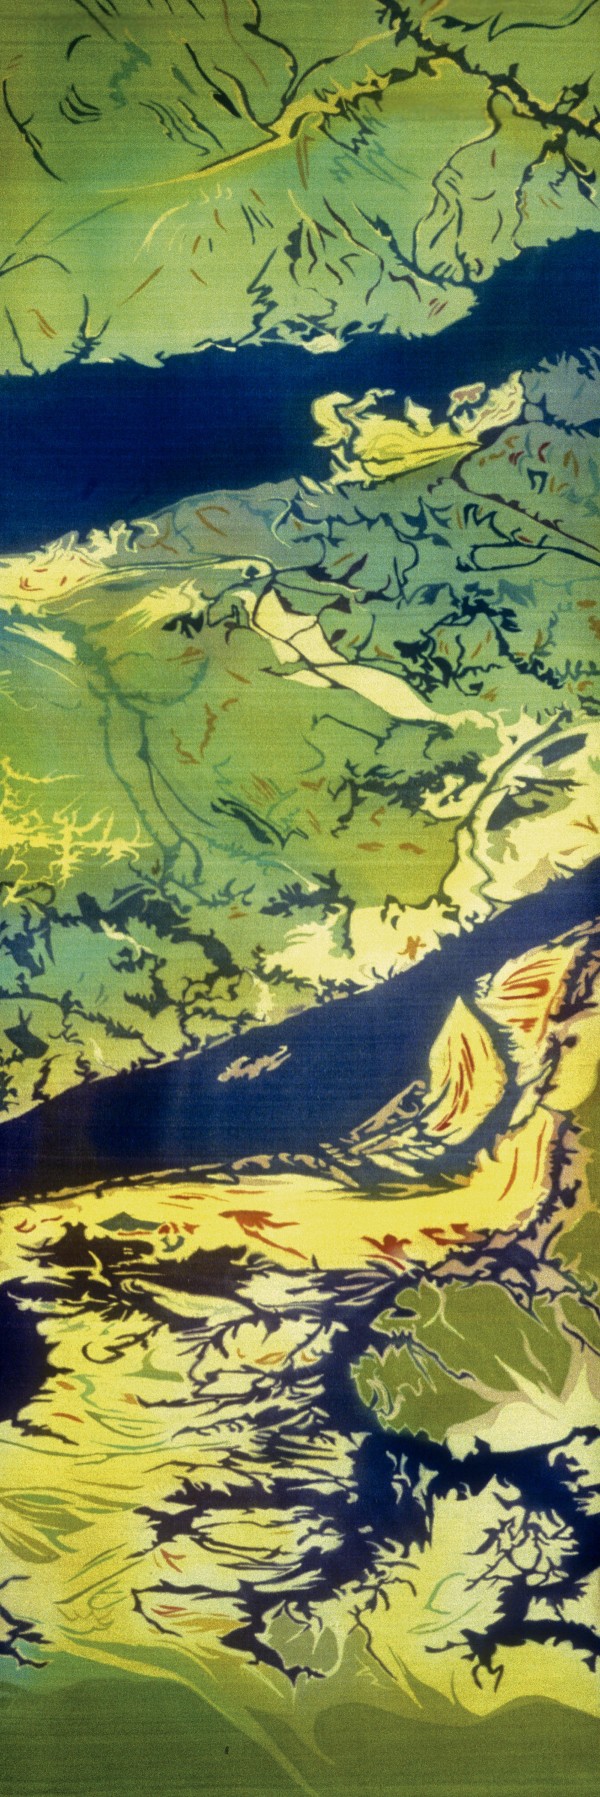 Amazon River (South America) by Mary Edna Fraser